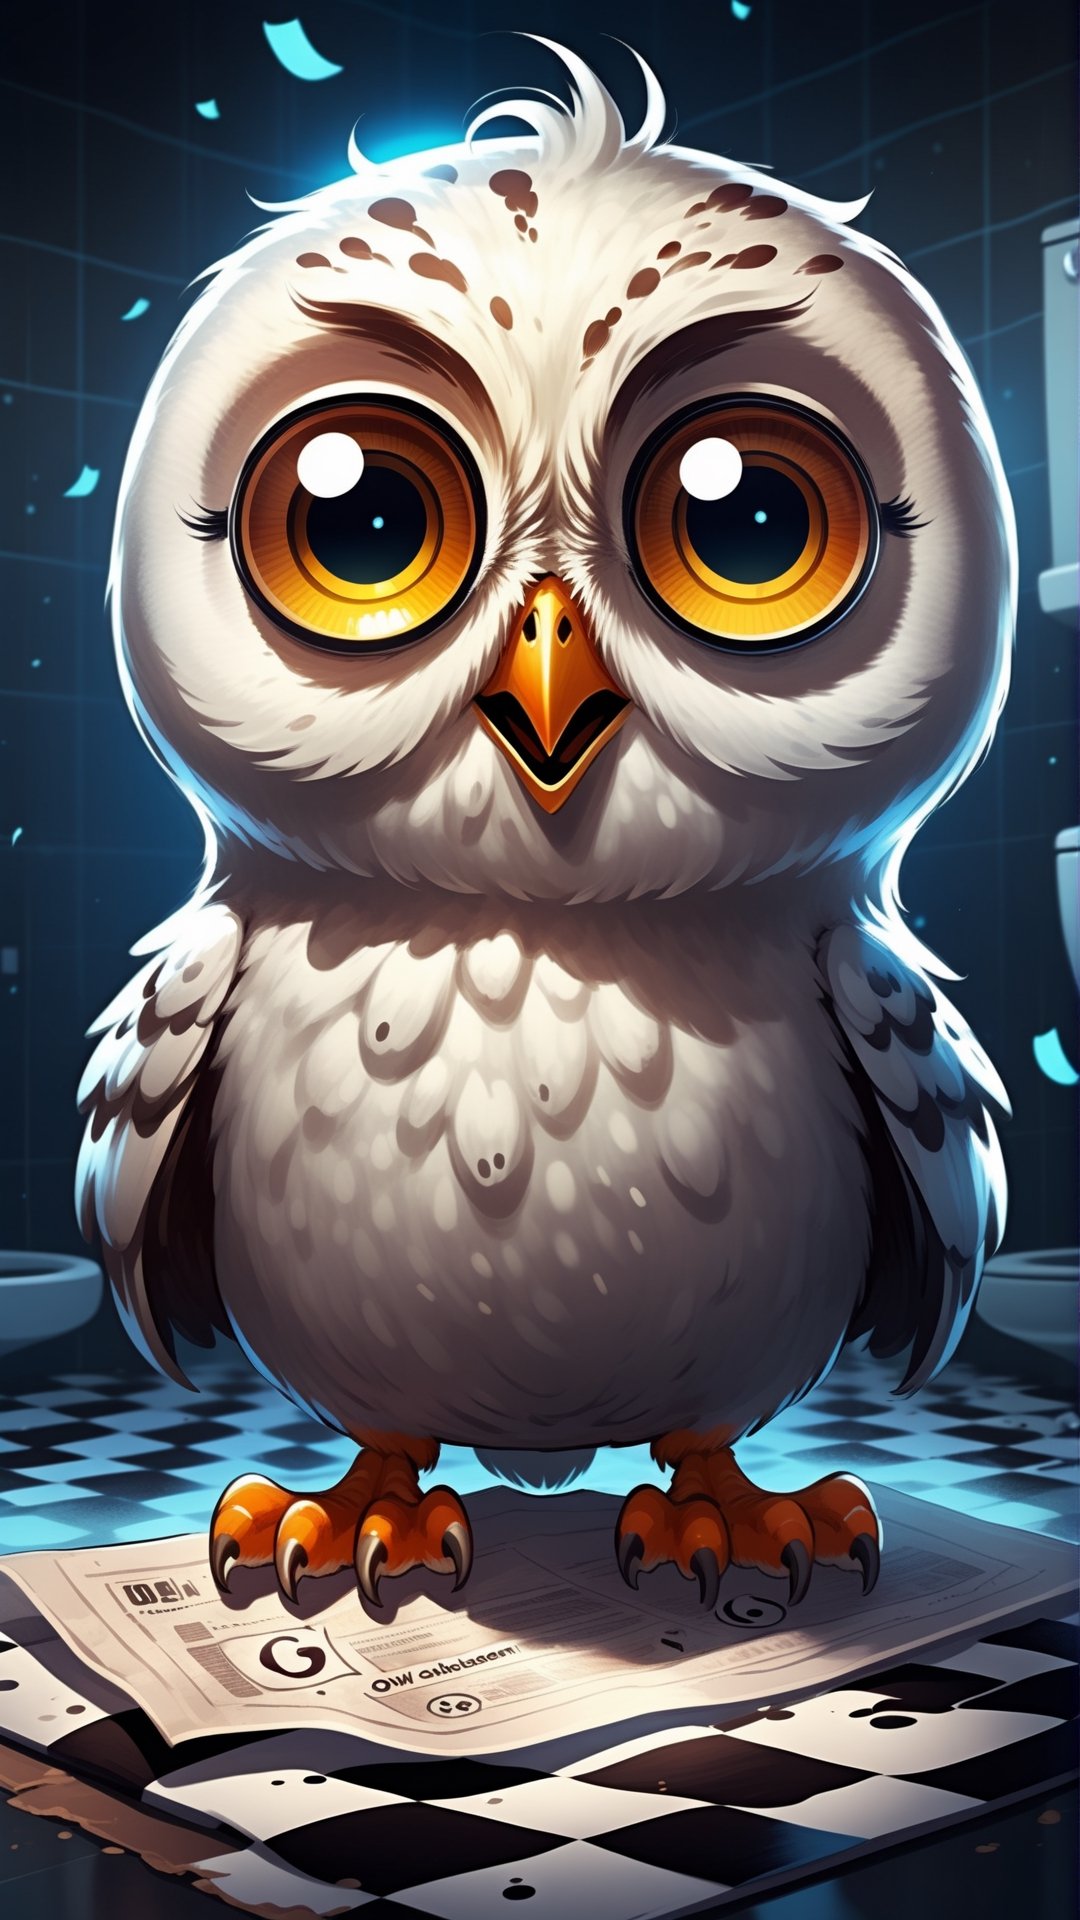 a cute big round eyes owl meeting Ghost while using toilet,  background: small washroom, 1toilet, 1window, checkerboard floor, mess, newspaper, (white slime blasts), wisp, funny, chibi, halloween theme, 2D Animated CG Horror Movie style,chibi emote style